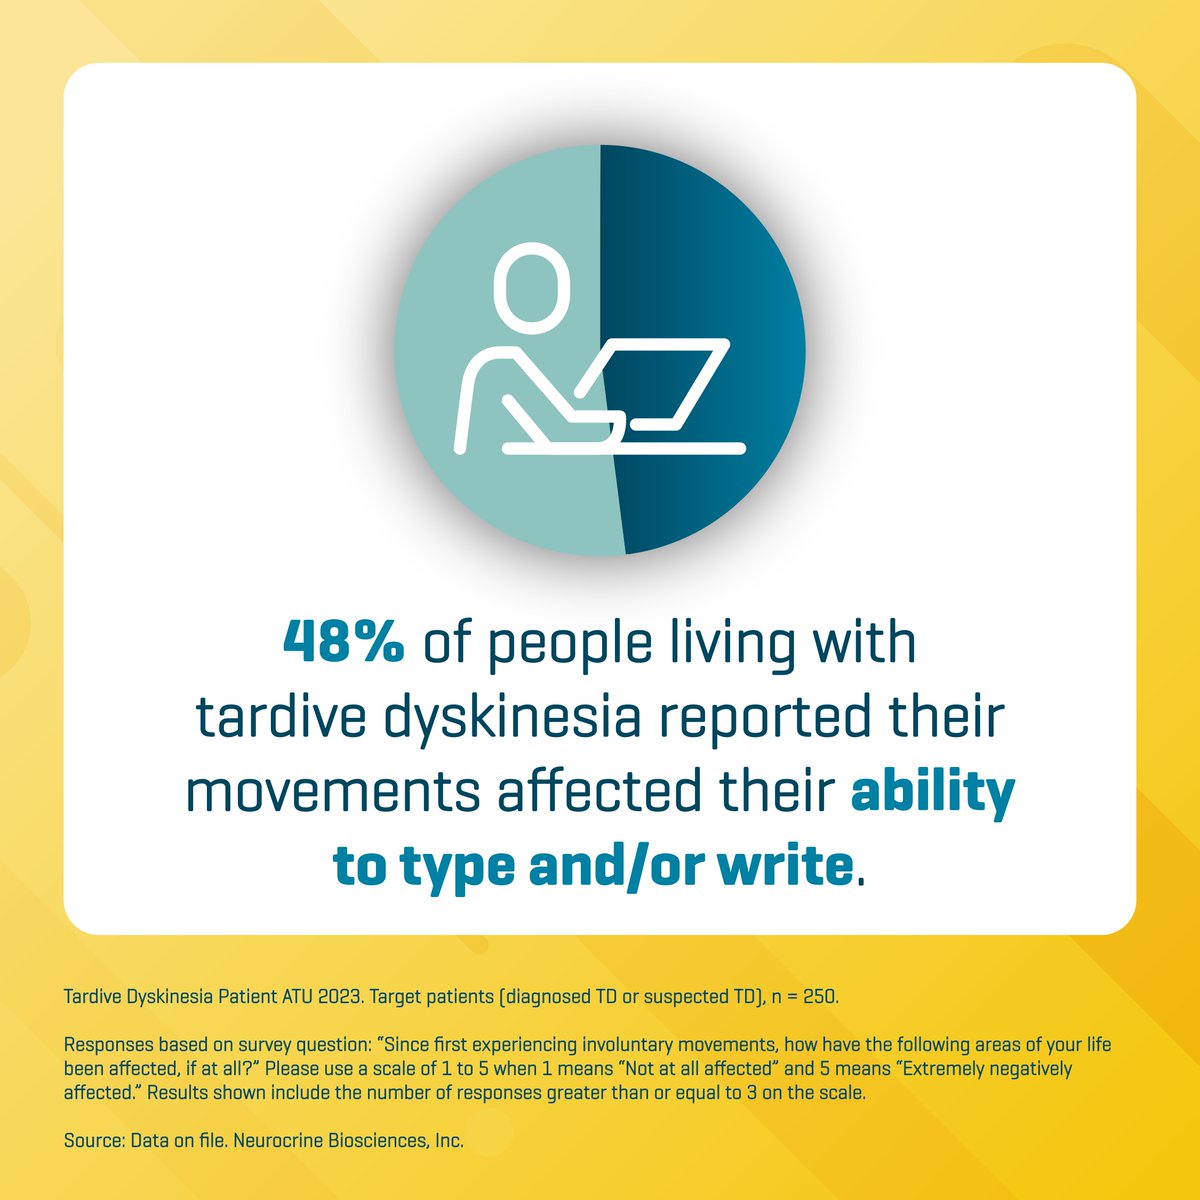 ~65% of people living with tardive dyskinesia (TD) have not yet been diagnosed, which is why it’s important for individuals being treated for mental illness with antipsychotic medications receive routine screenings. Learn more at TalkAboutTD.com #Screen4TD